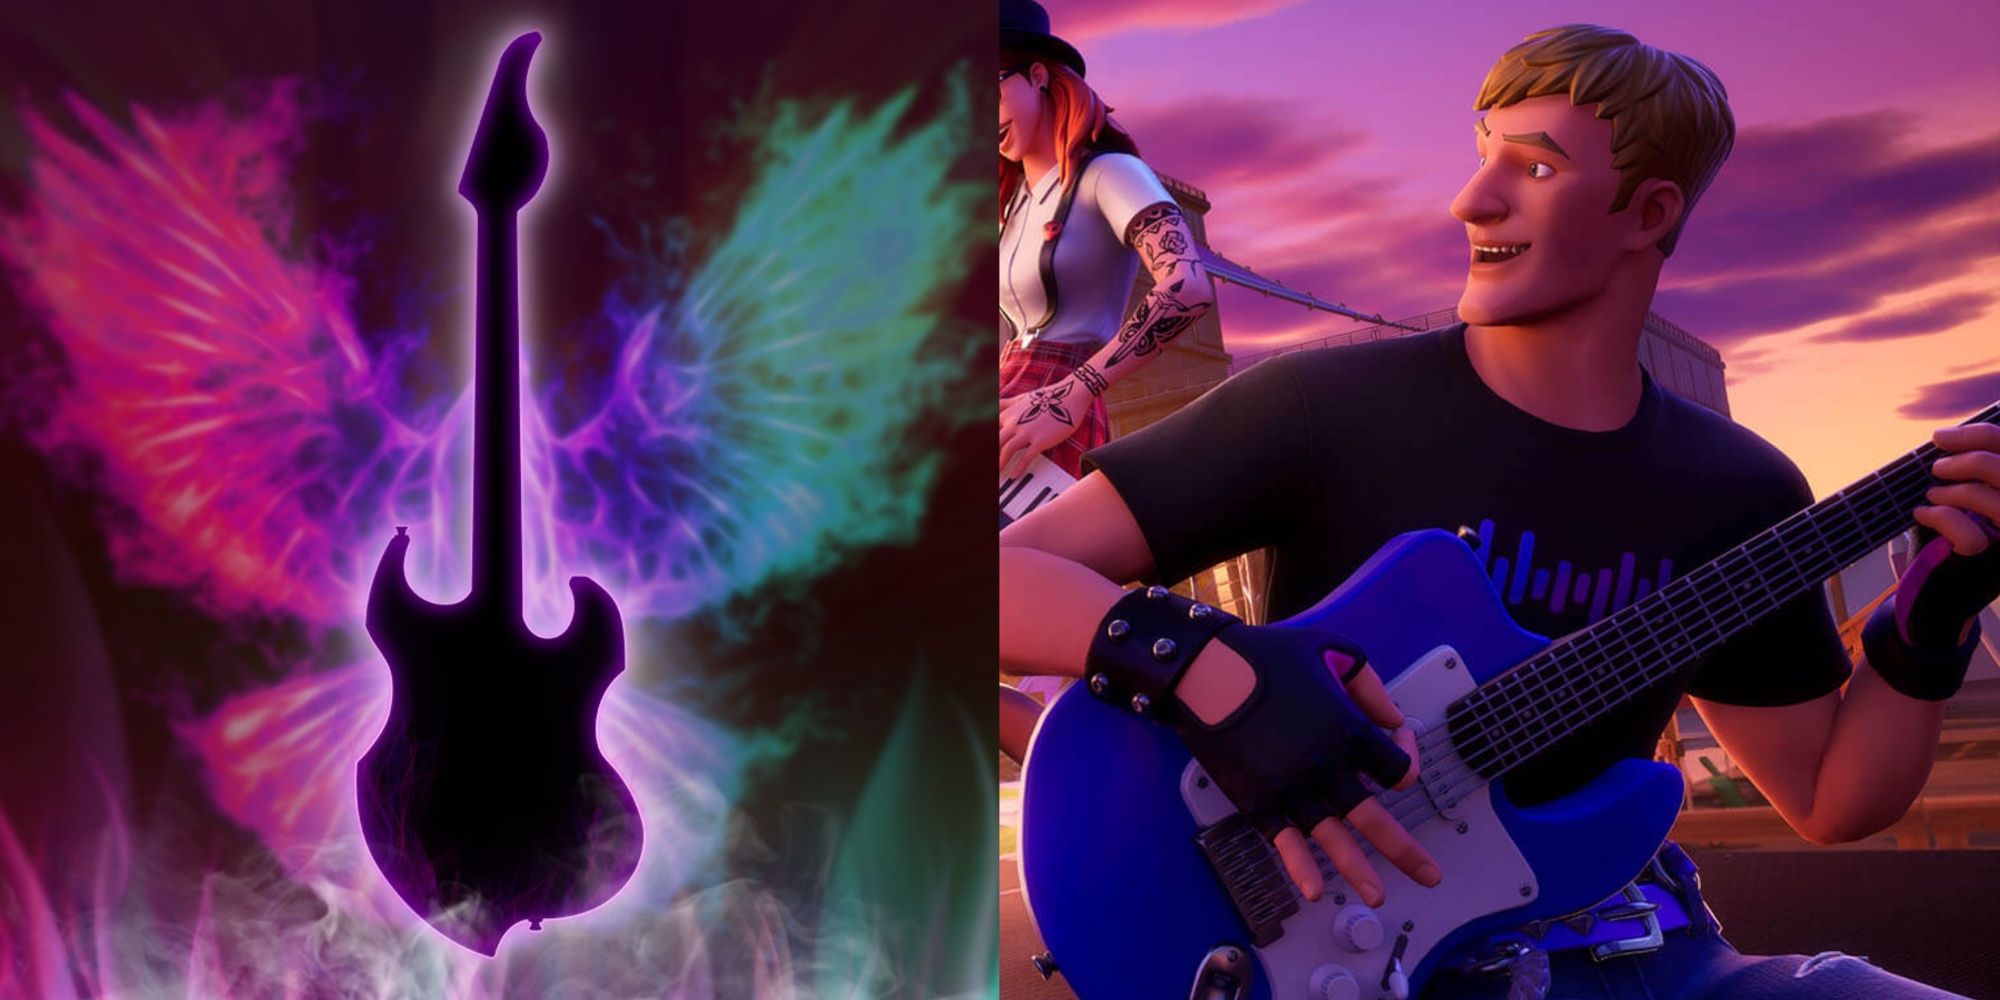 fortnite's jonesy playing a guitar and looking at pdp's guitar controller tease